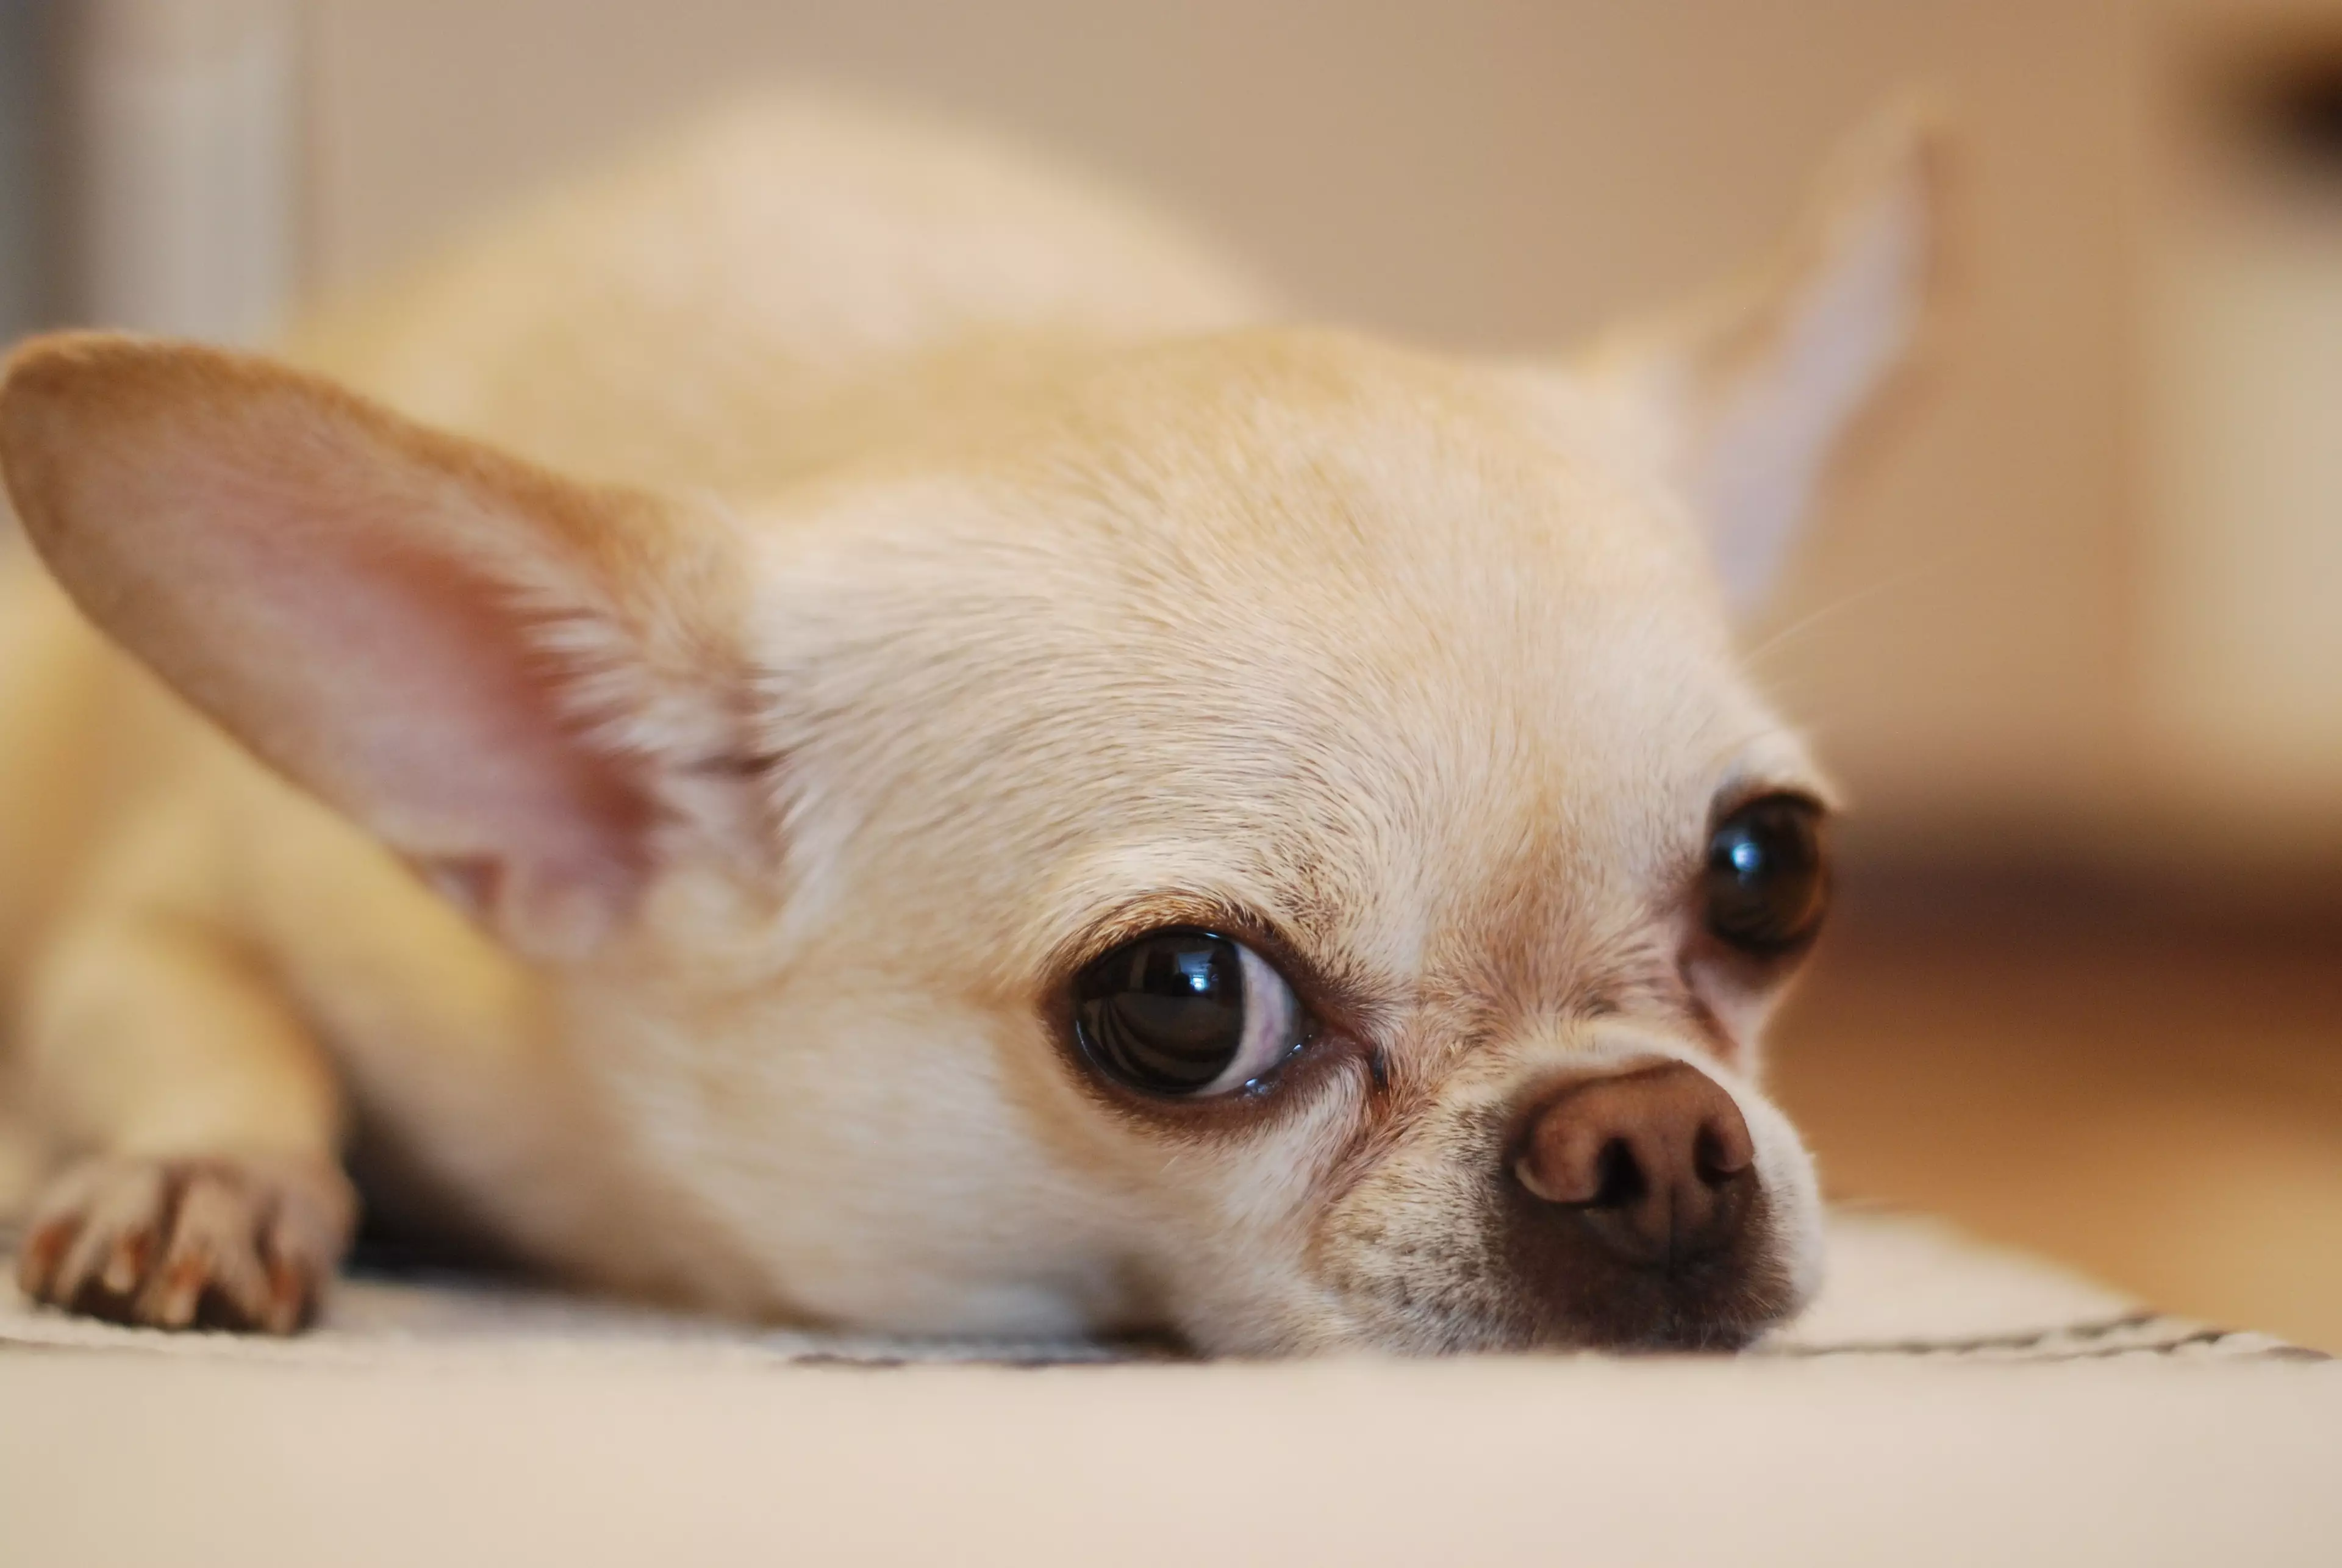 For small breeds like chihuahuas large amounts of chocolate can be deadline (